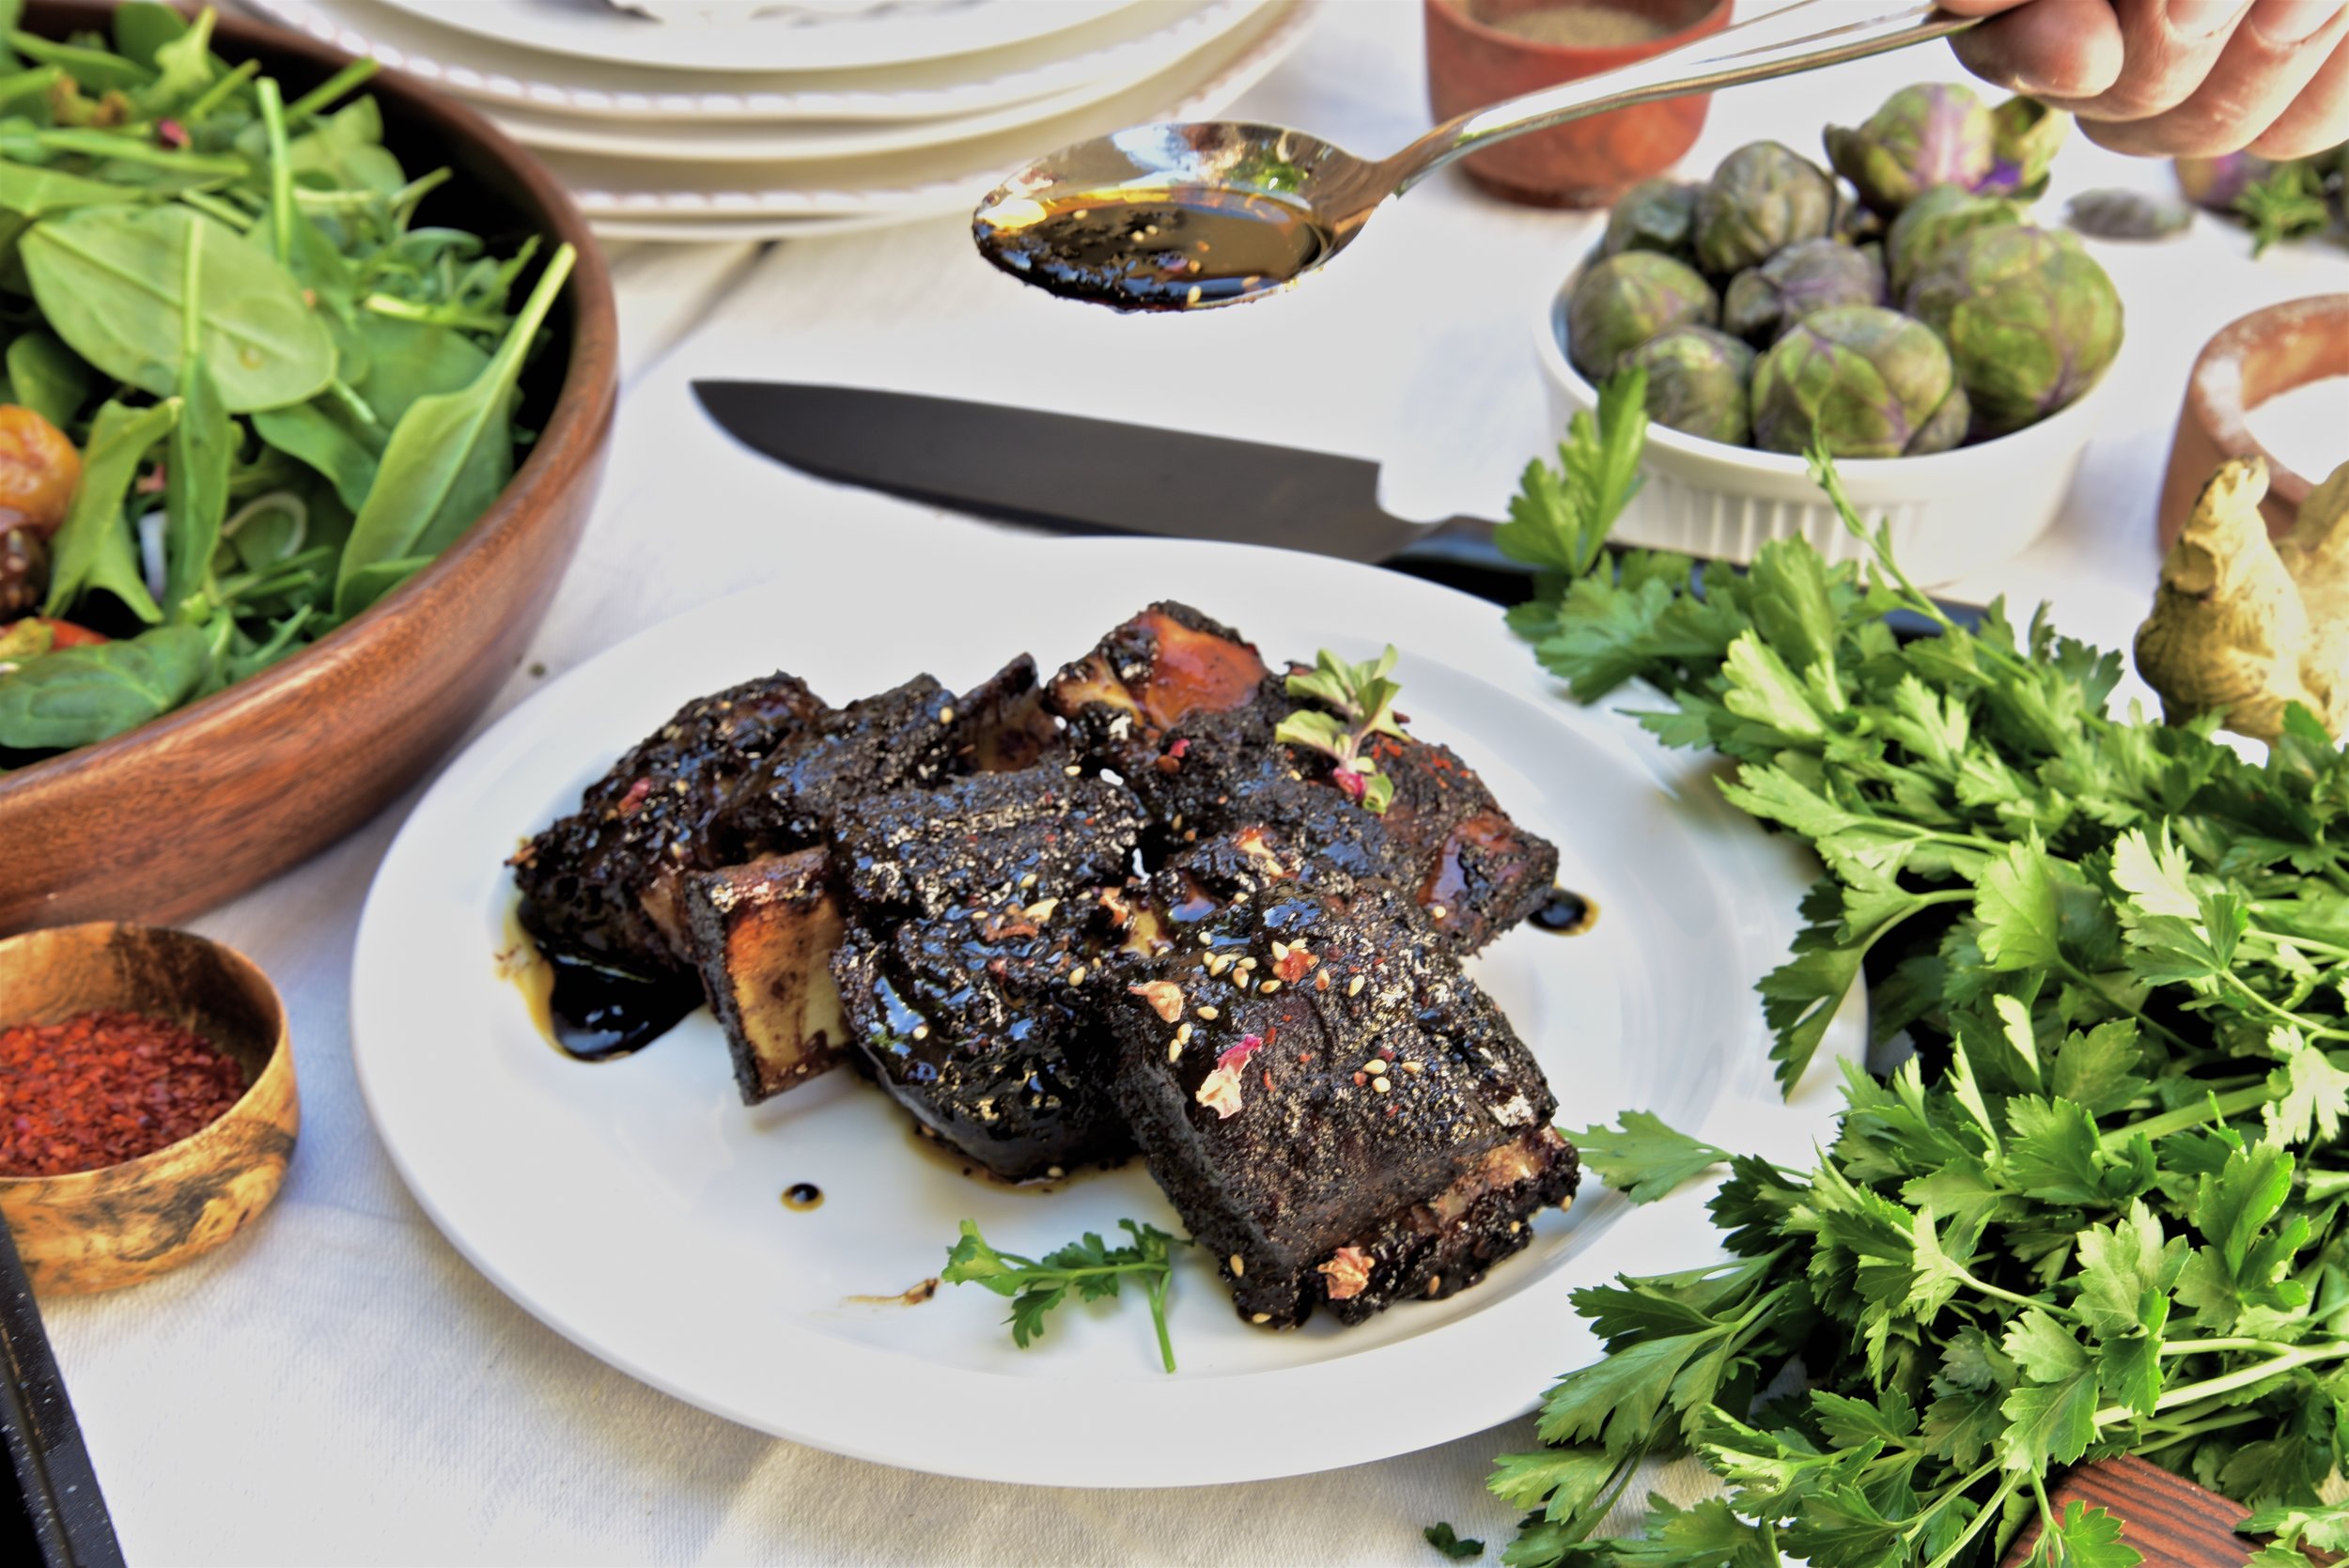 Dry rub ribs with a molasses chili paste glaze. It's even better than you might imagine.